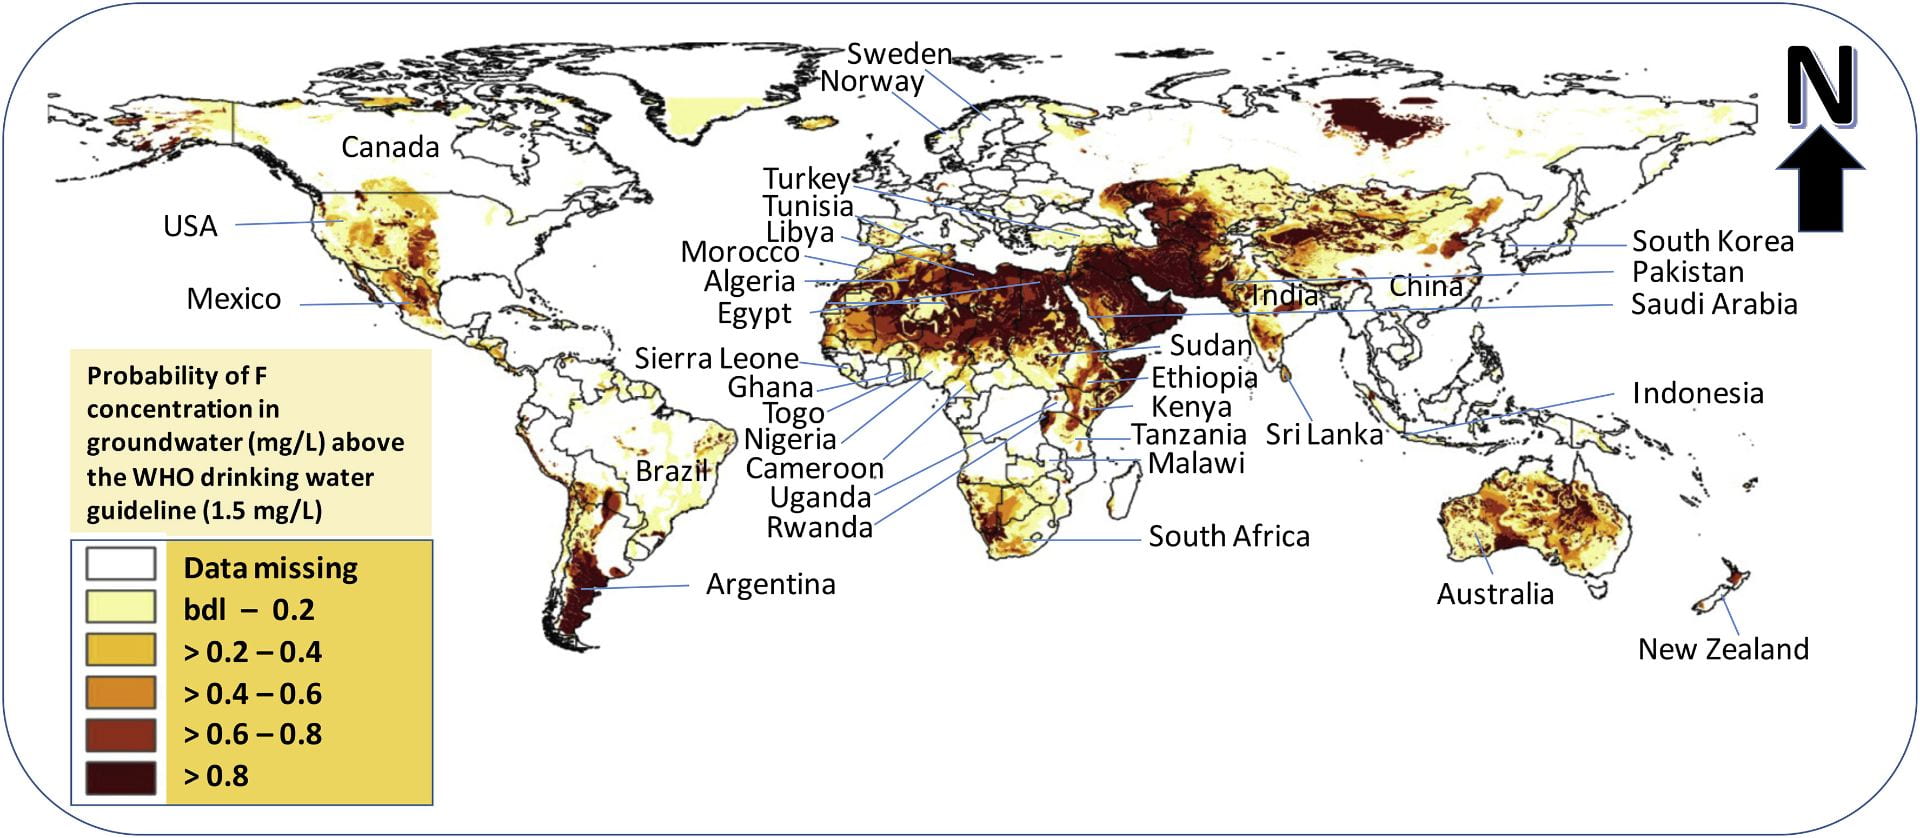 Map showing the occurrence and distribution of fluoride in groundwater in different parts of the world. Northern Africa and the Middle East have very high natural levels of fluoride, while New Zealand does not.